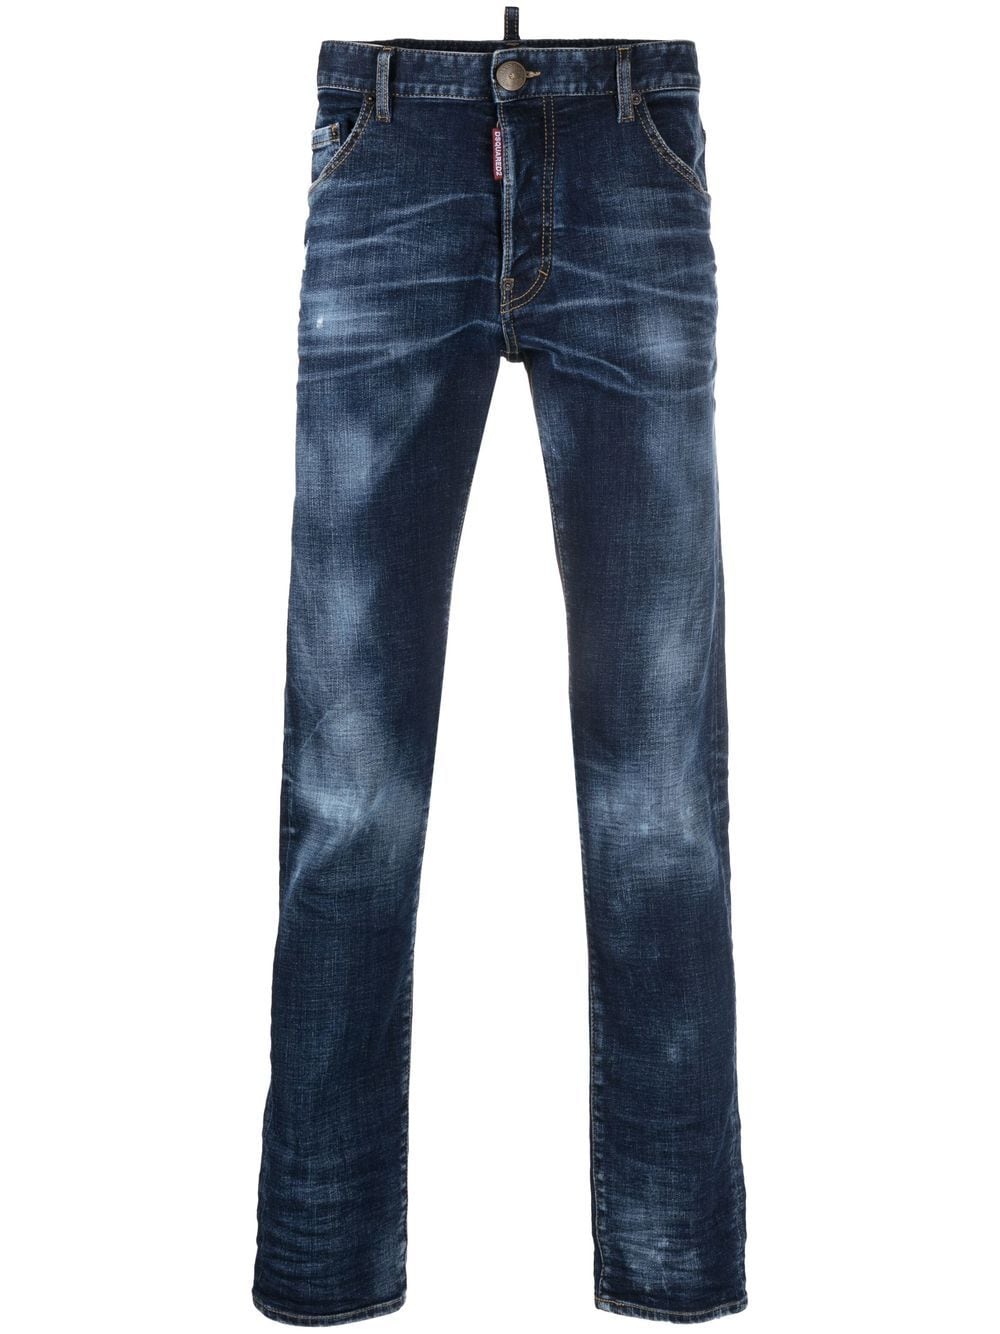 DSQUARED2 Faded Stretch Cotton Jeans for Men: Dark-Wash Denim with Subtle Faded Effect